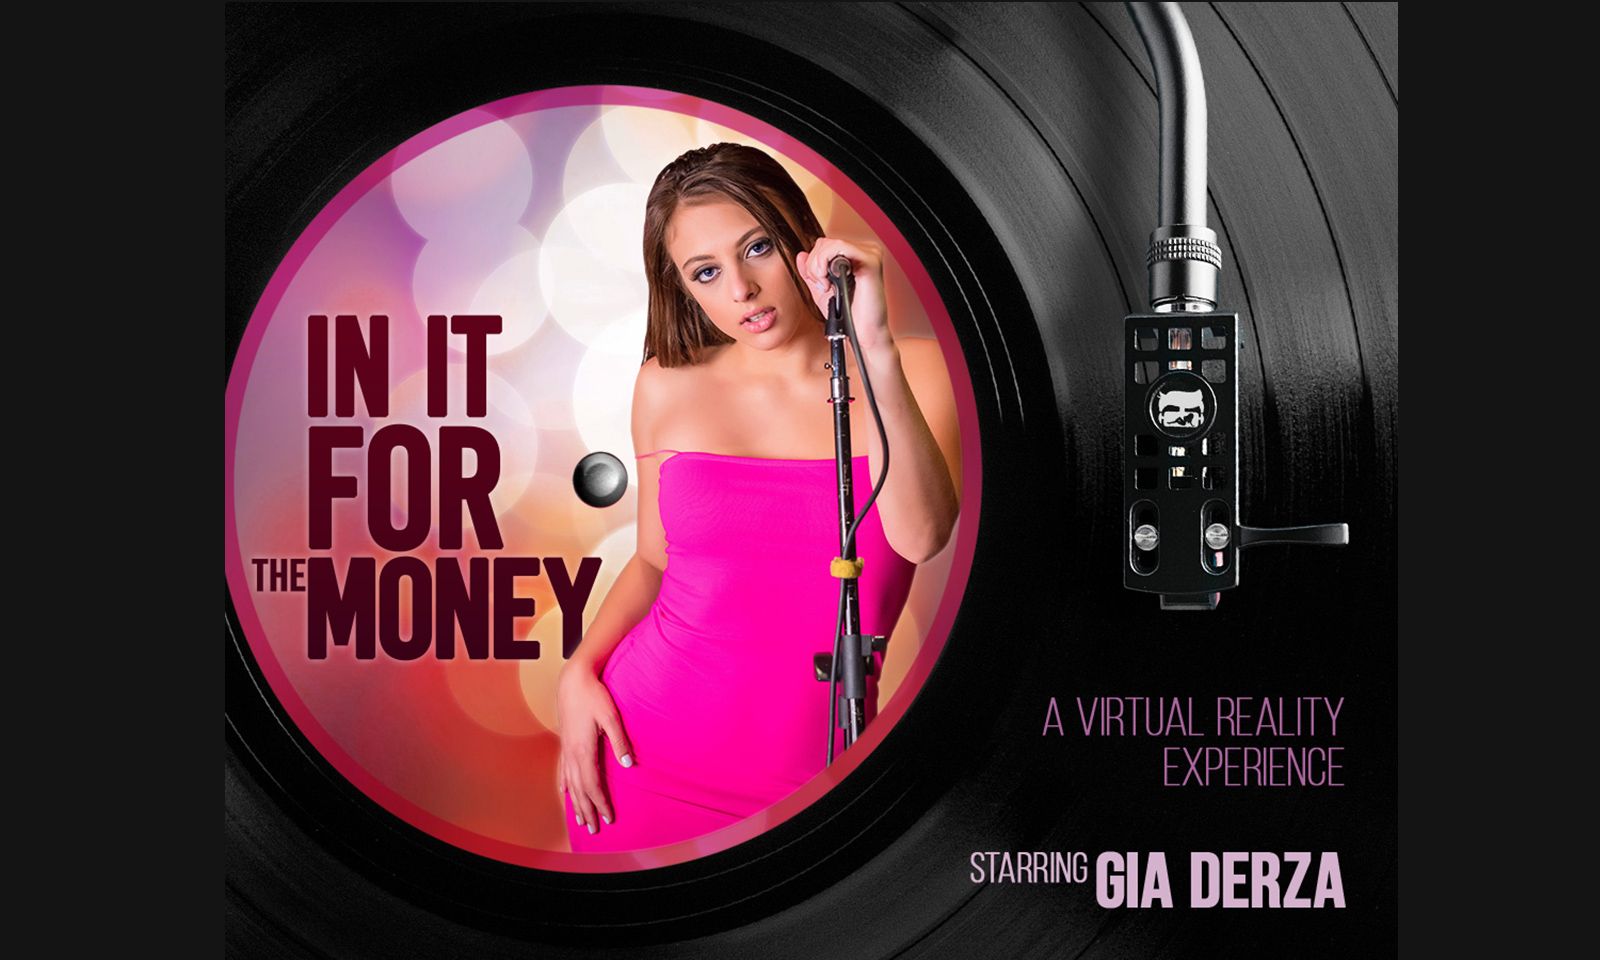 Is Gia Derza “In It For The Money”? VR Bangers Knows!